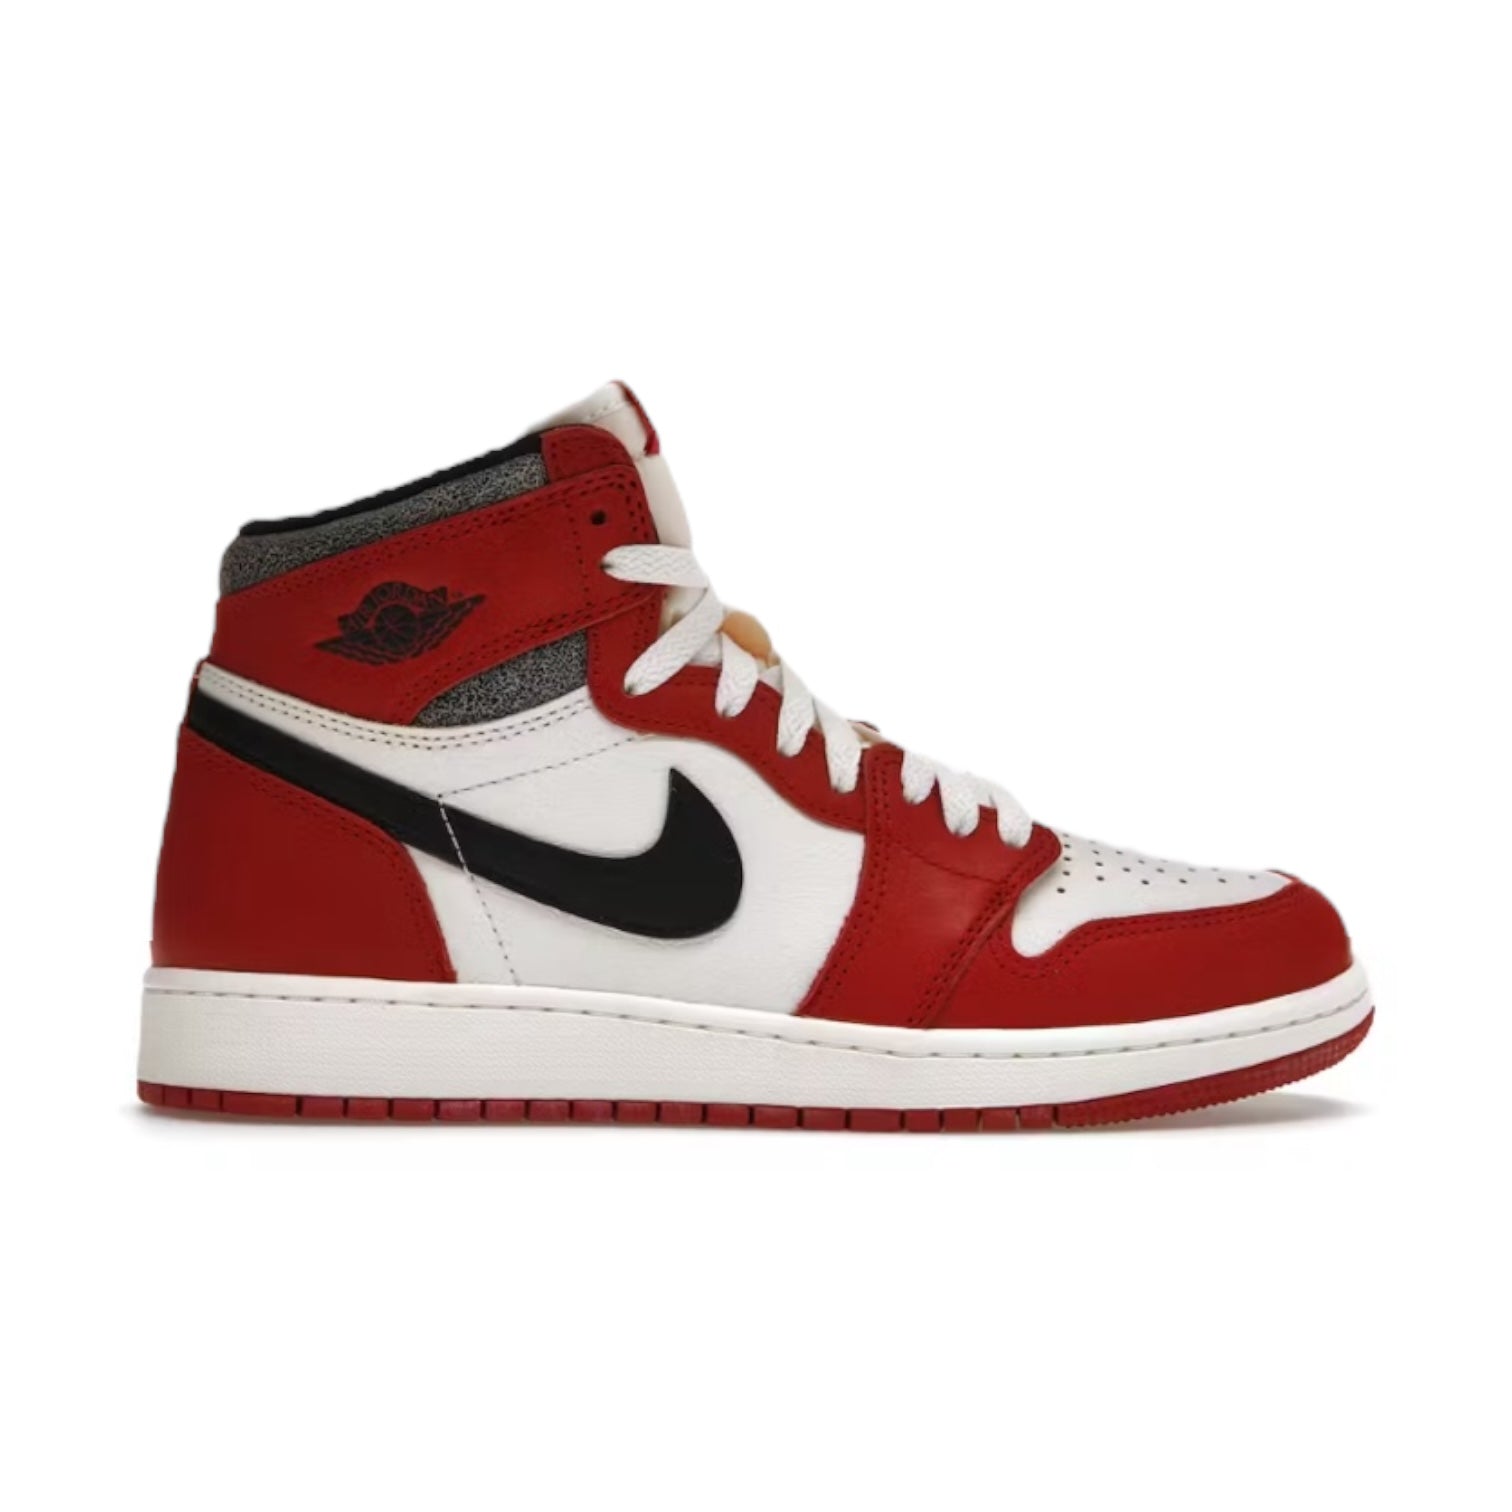 Jordan 1 Lost and Found (Used)